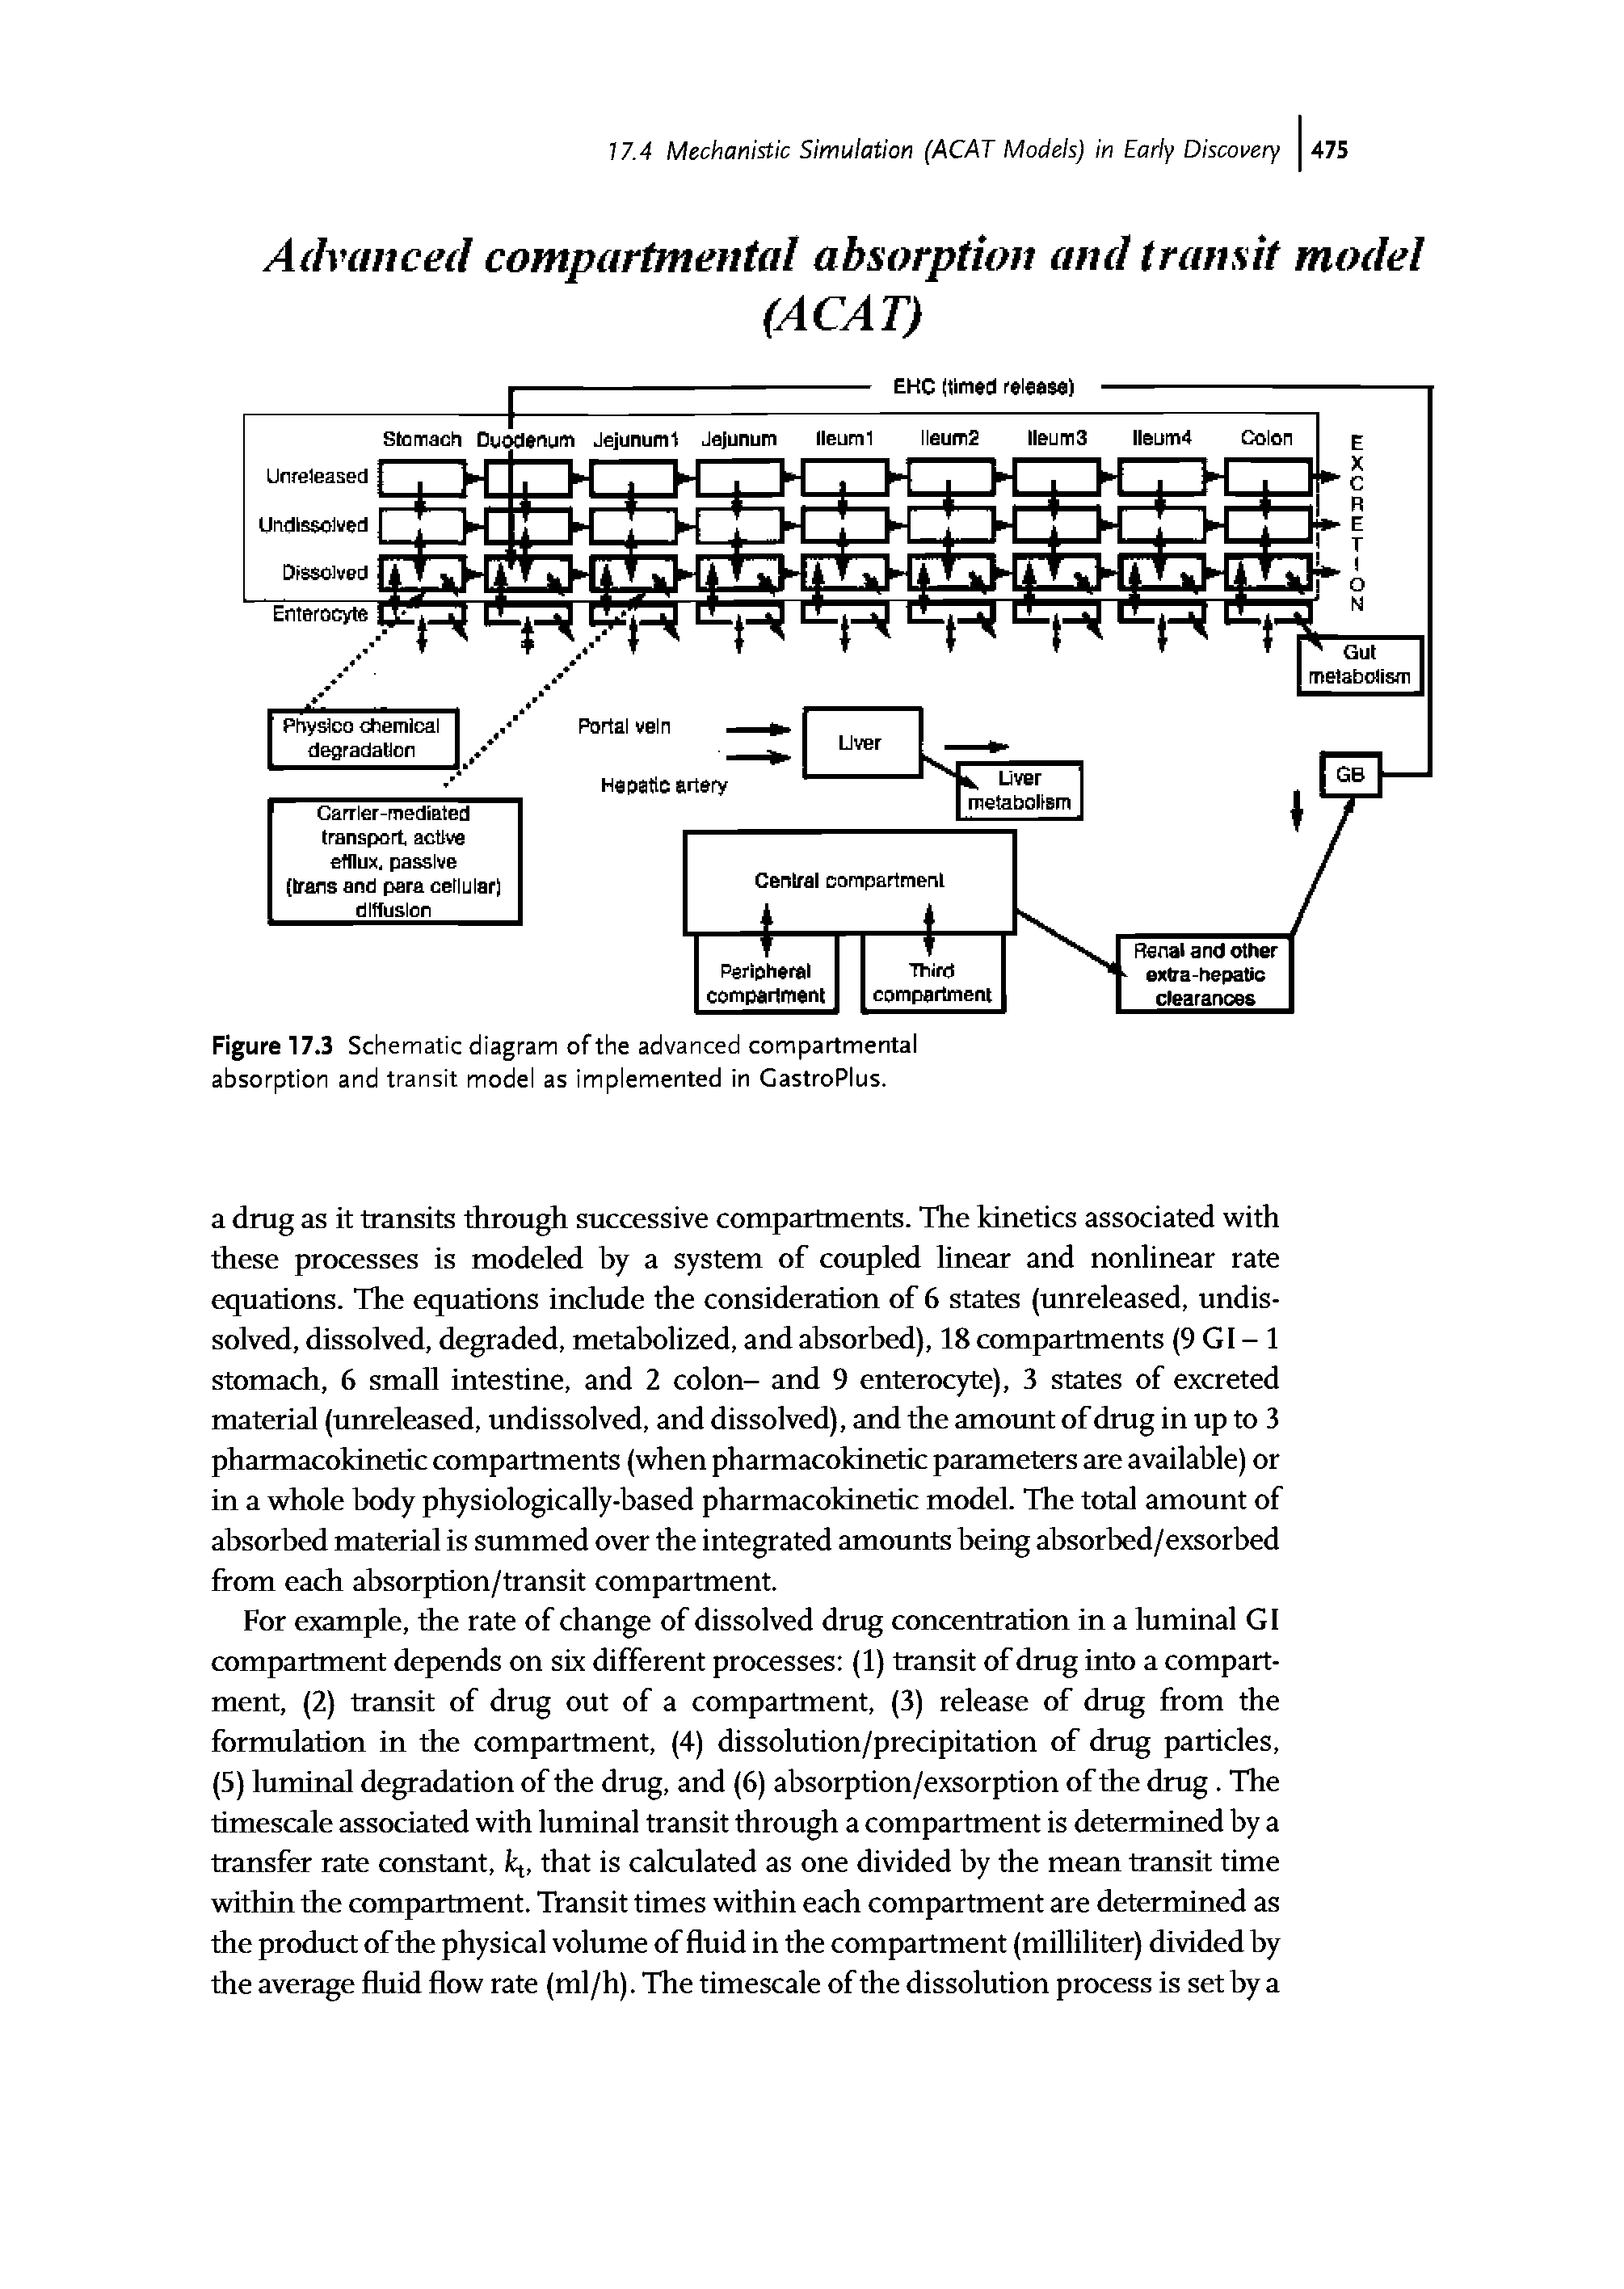 Figure 17.3 Schematic diagram of the advanced compartmental absorption and transit model as implemented in CastroPlus.